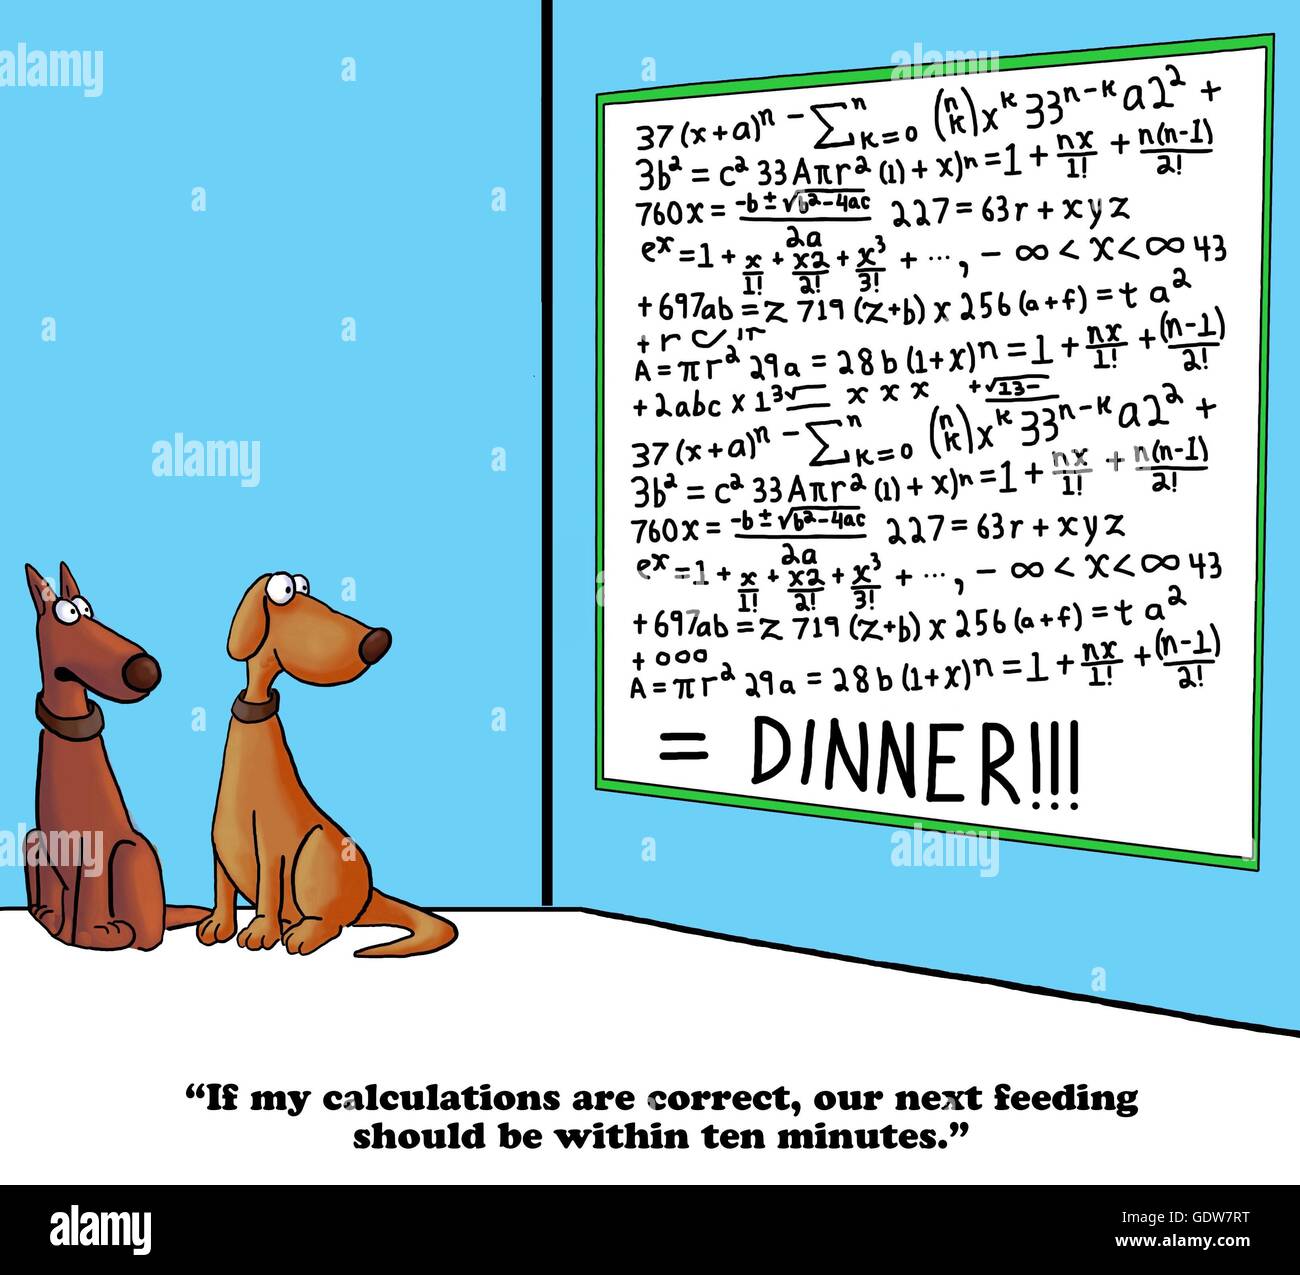 Dog cartoon about predicting dinner time. Stock Photo